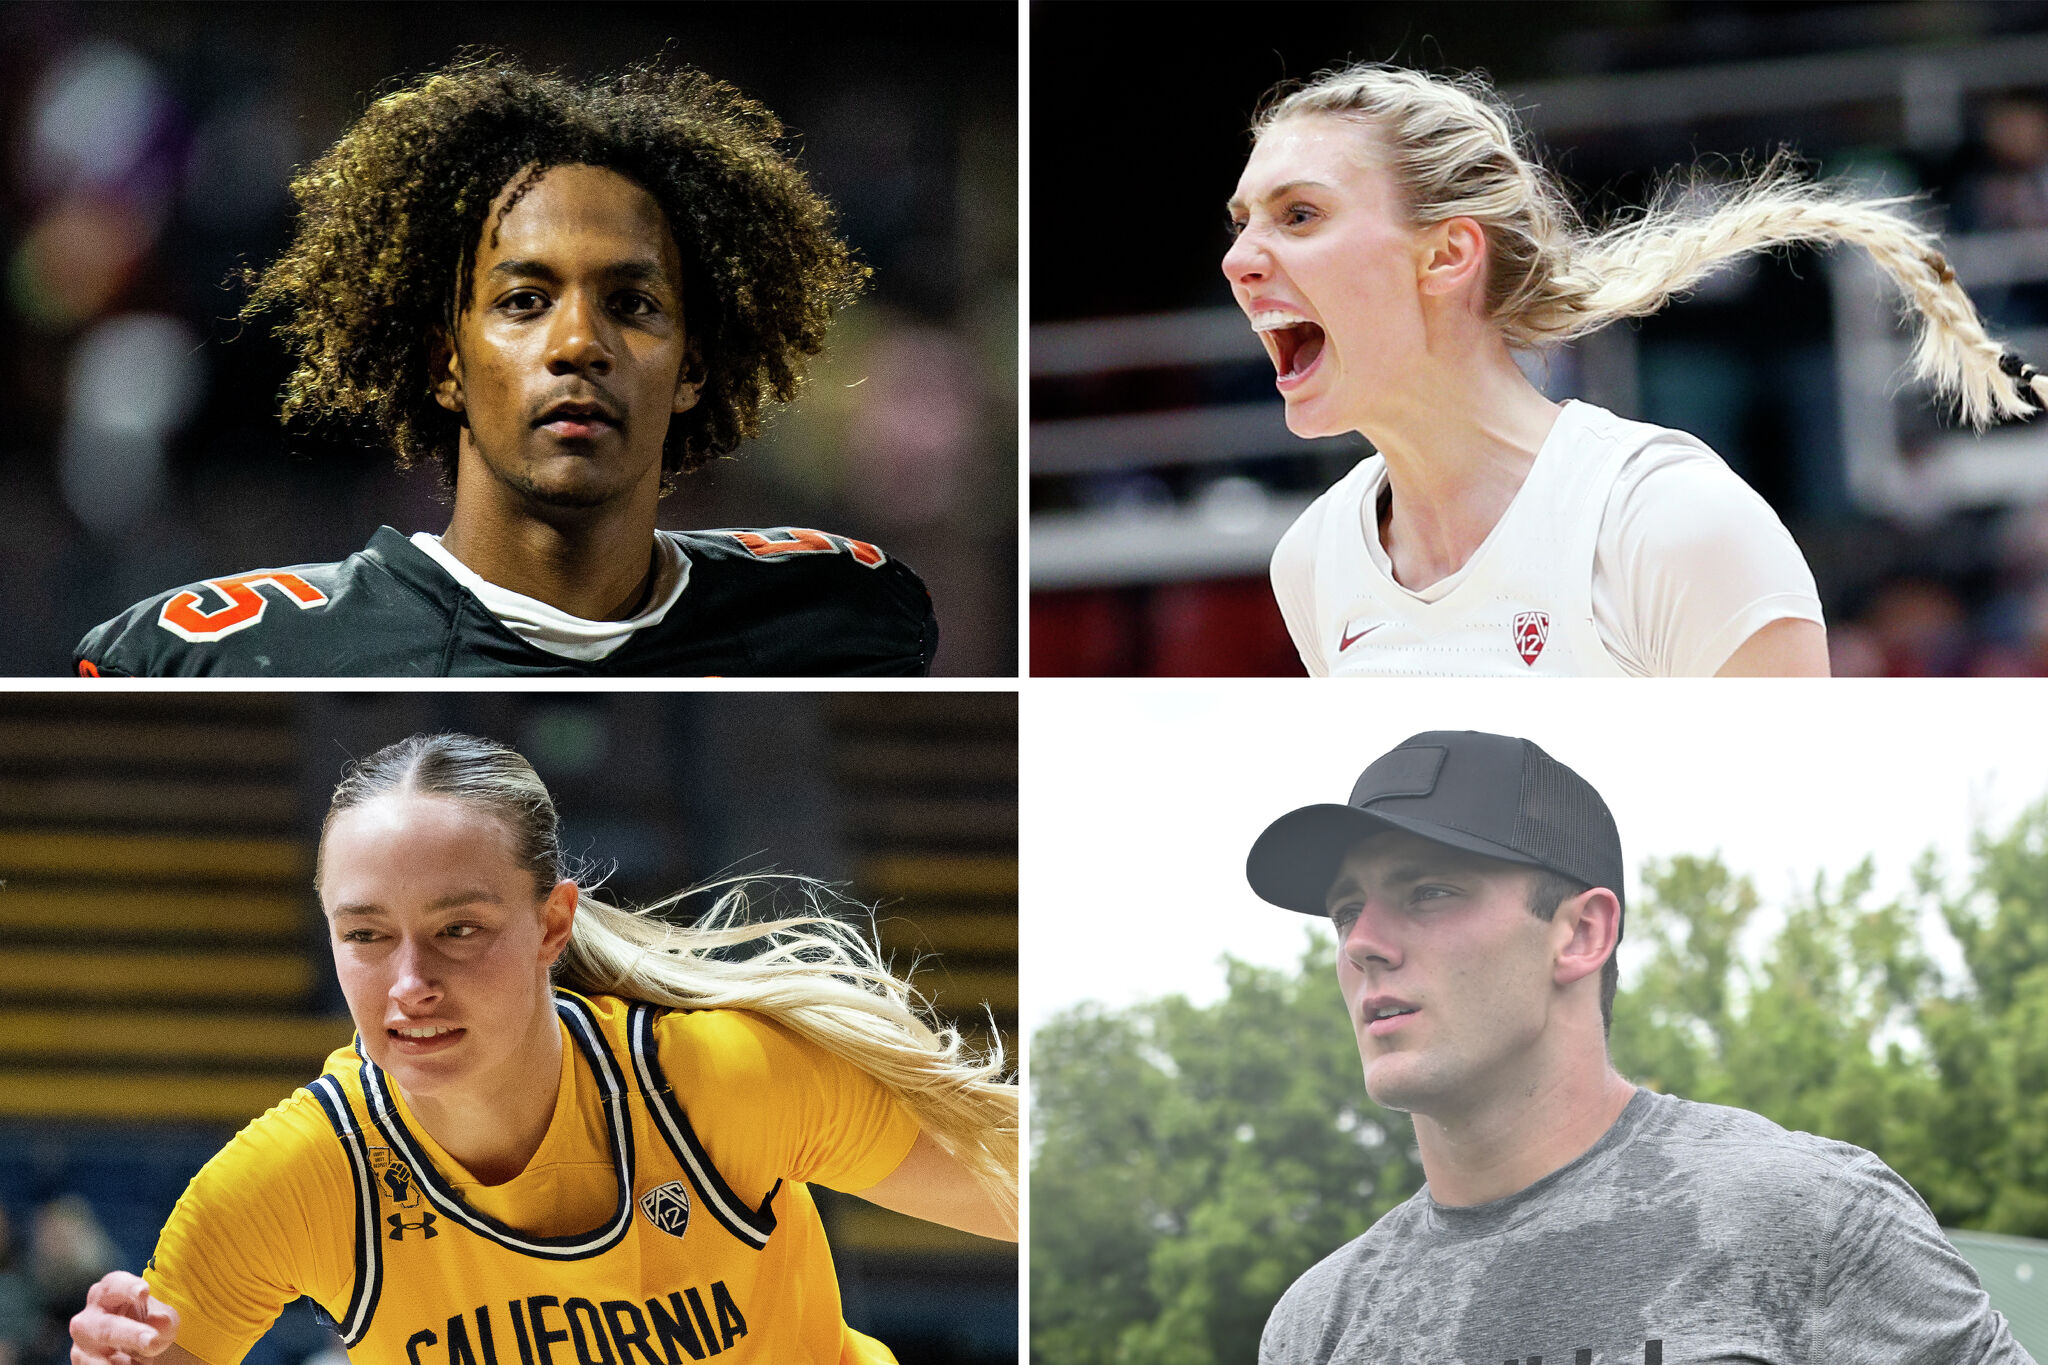 Meet the highest-paid athletes in the Bay Area featuring the